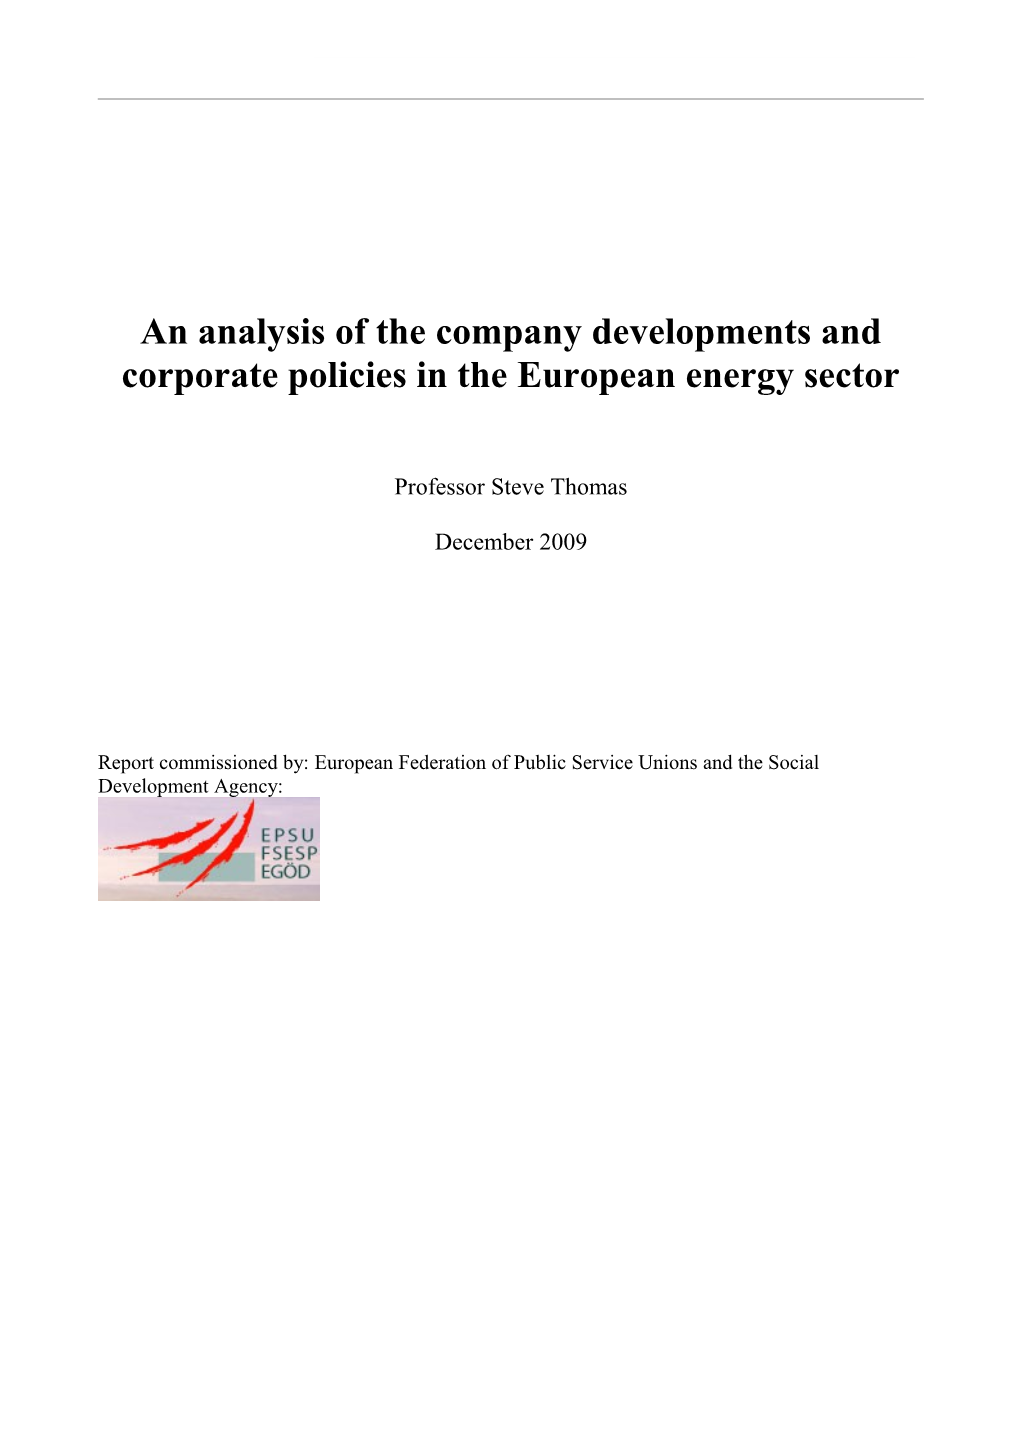 An Analysis of the Company Developments and Corporate Policies in the European Energy Sector